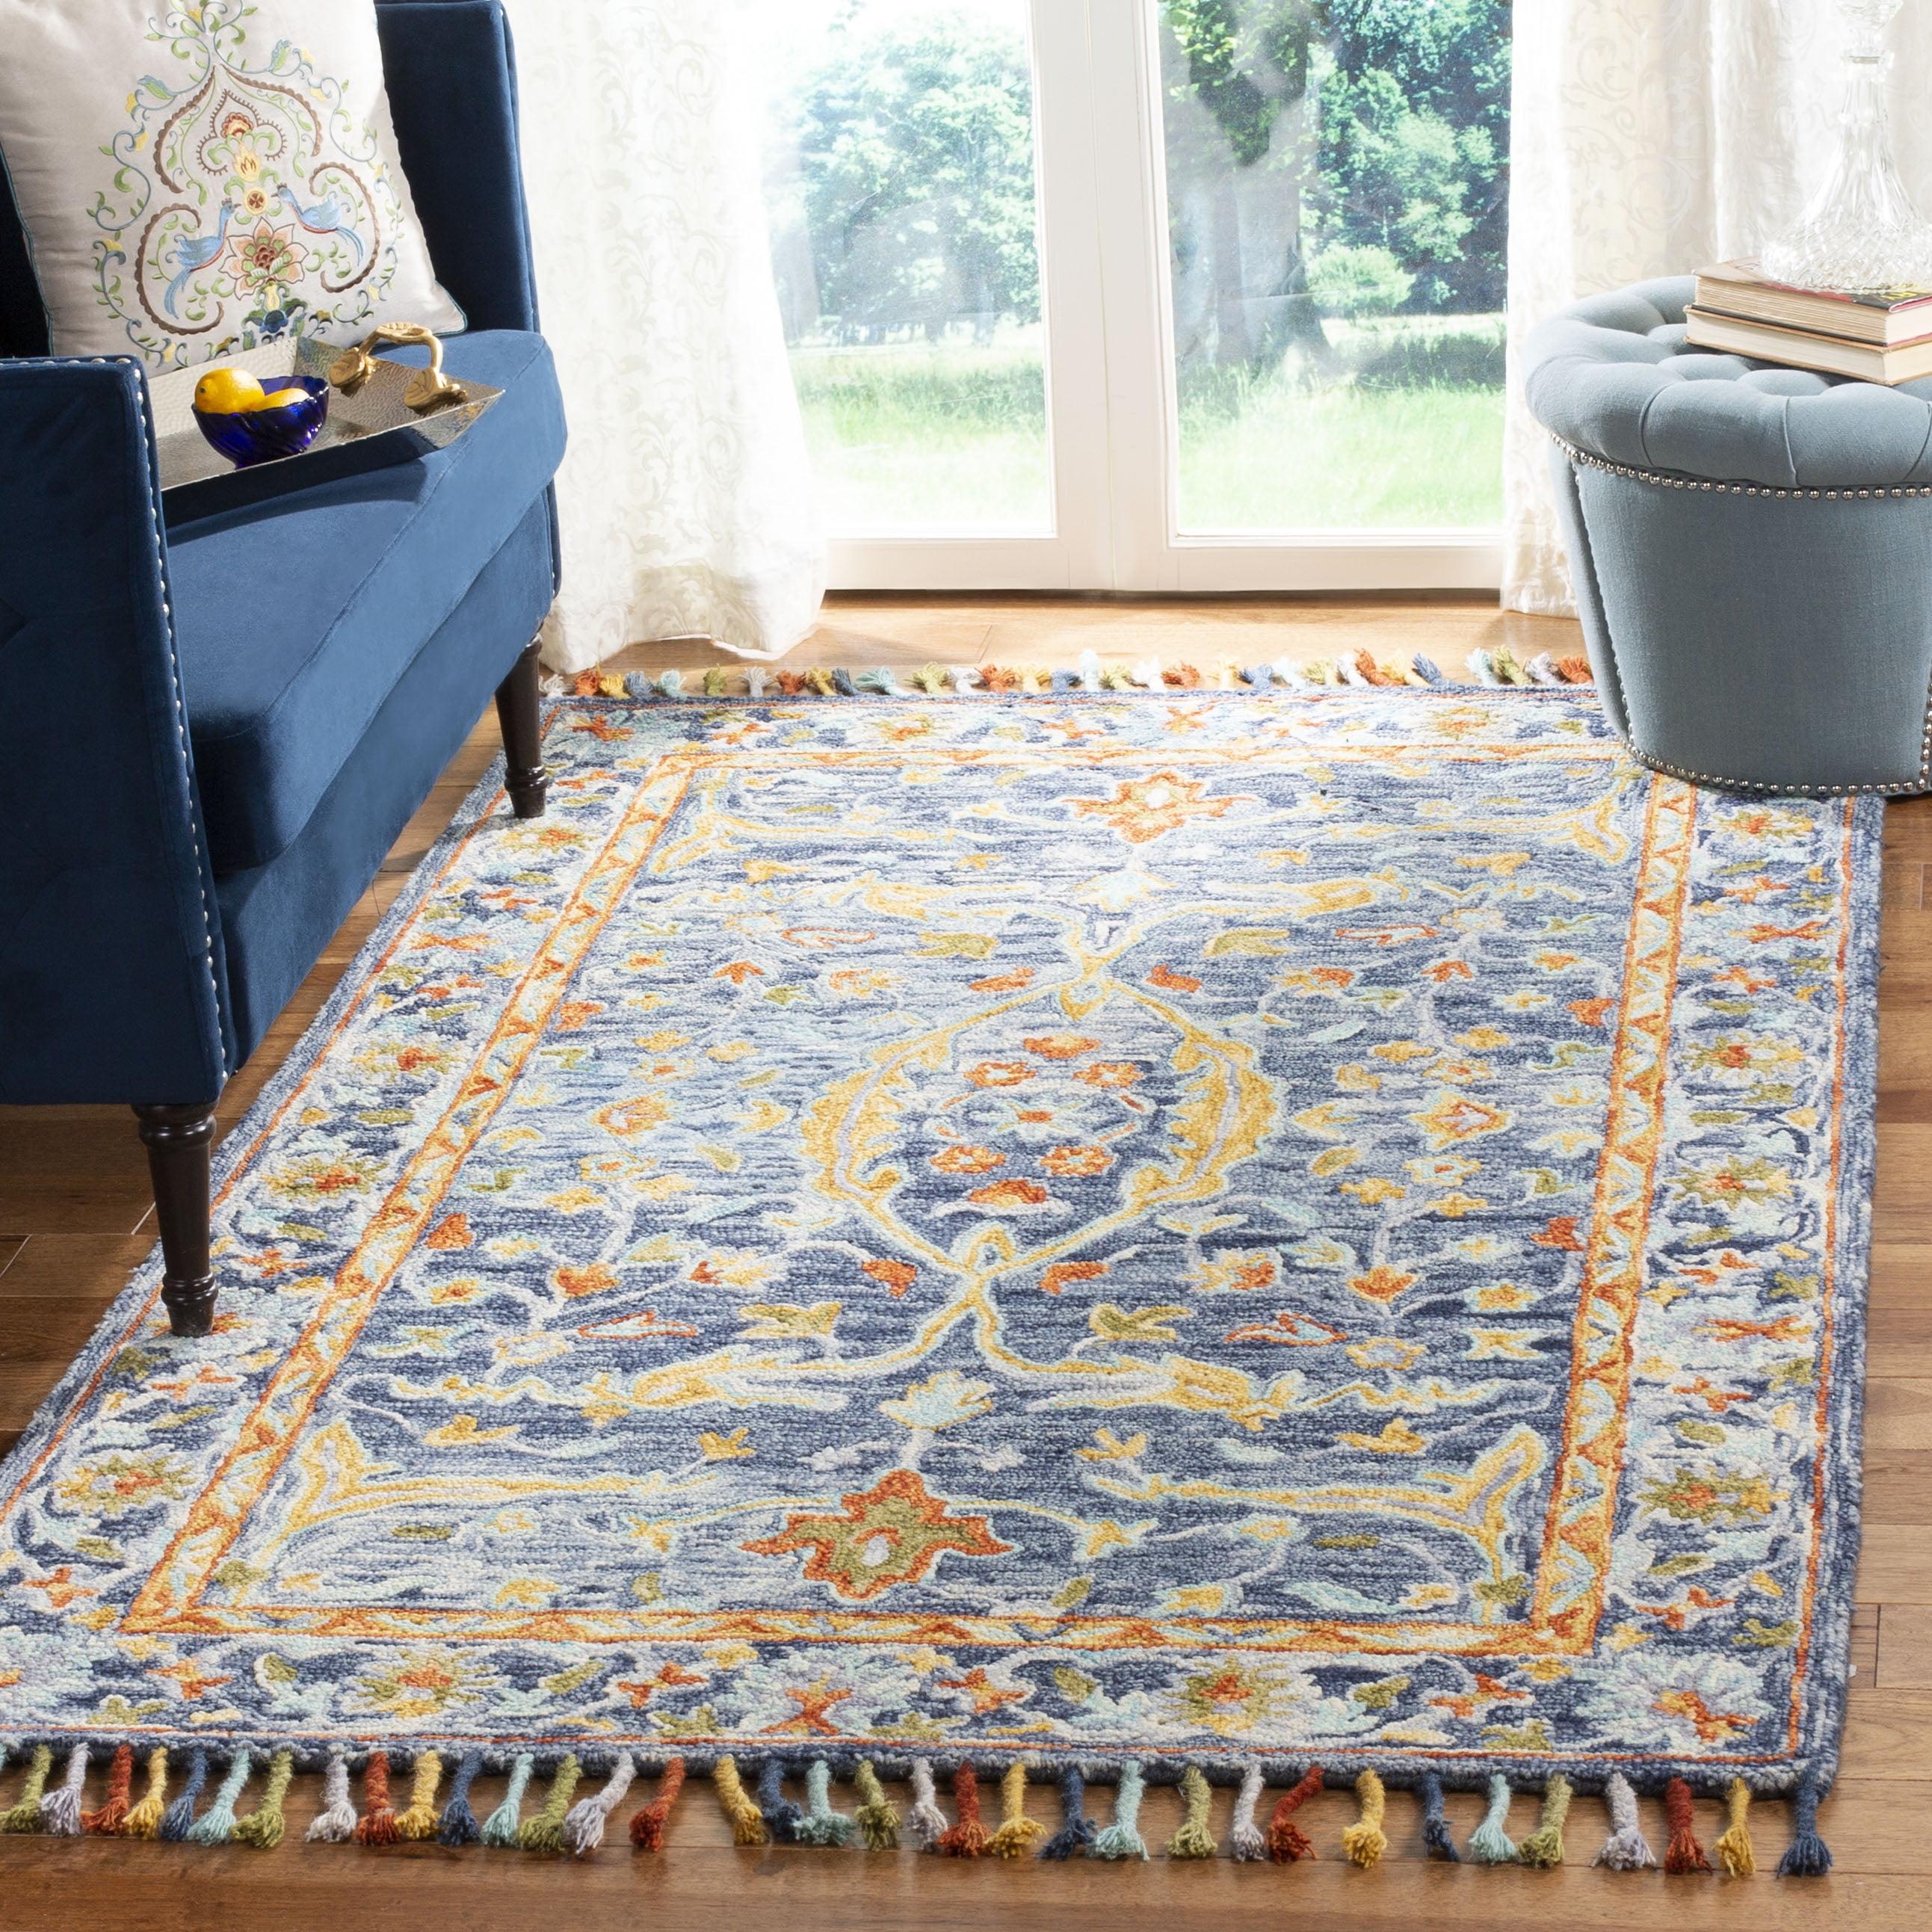 Handmade Tufted Wool Square Area Rug in Blue and Rust, 7' x 7'